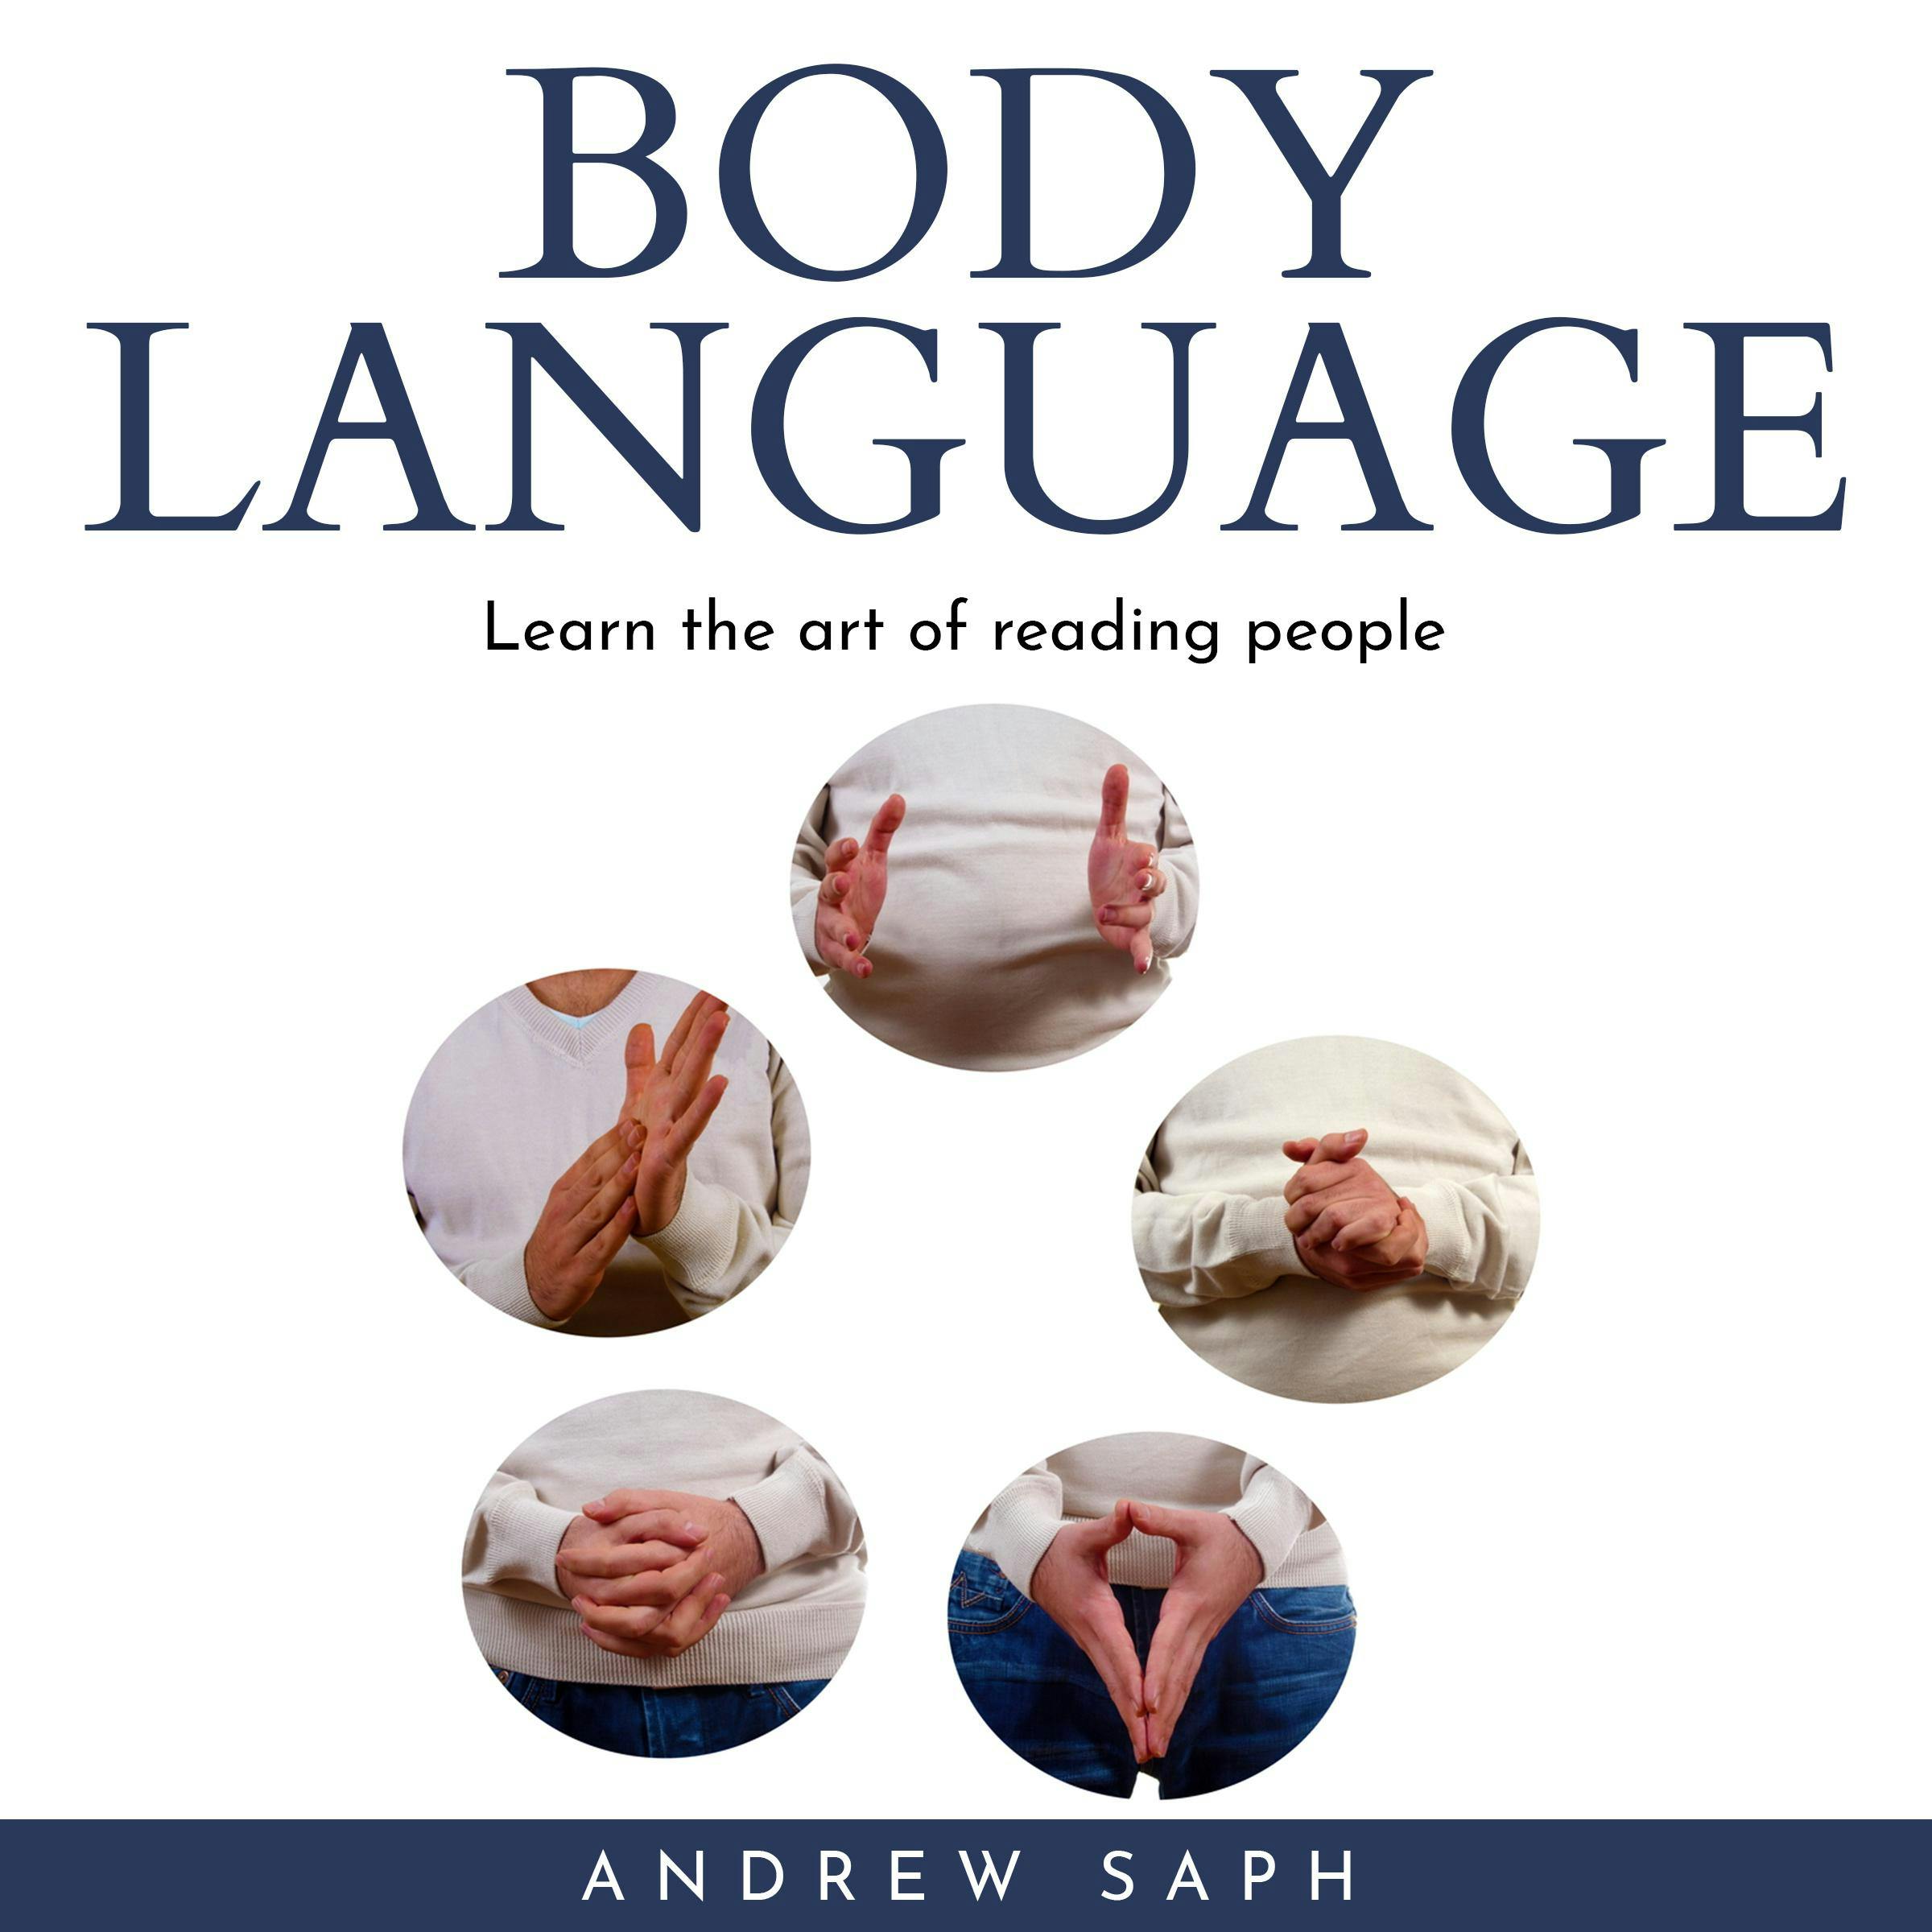 BODY LANGUAGE: Learn the art of reading people - Andrew Saph